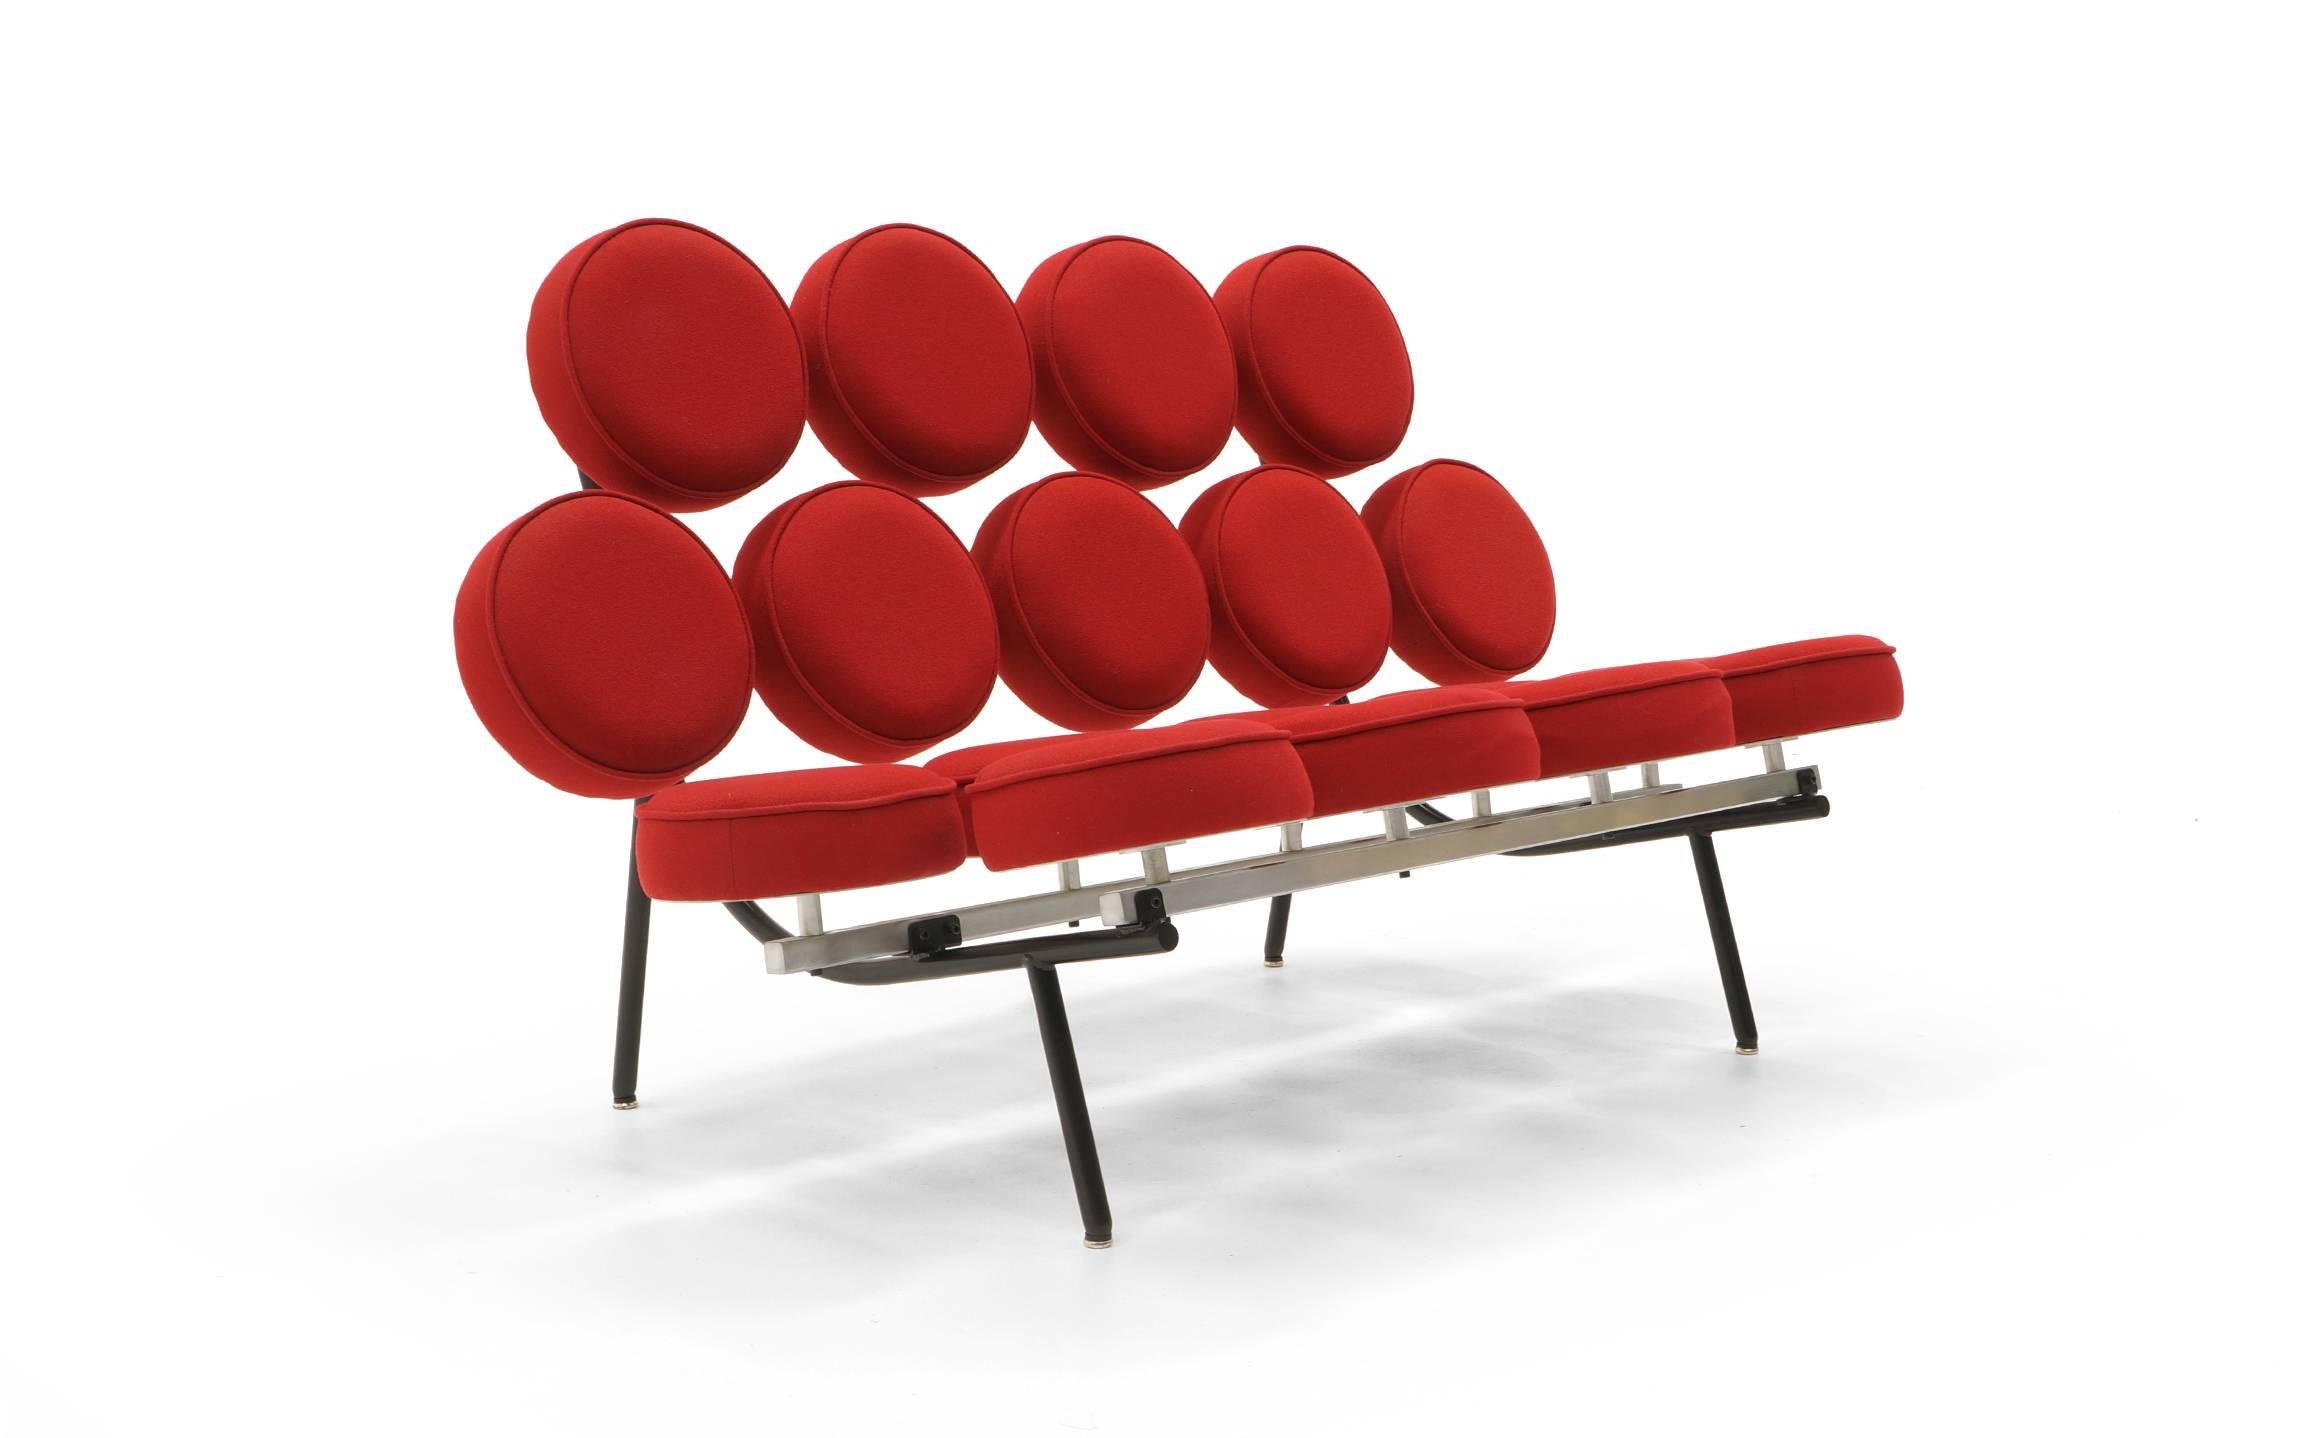 Red fabric Marshmallow sofa settee designed by Irving Harper for the George Nelson office. Excellent authorized production from Herman Miller made in the 2000s.